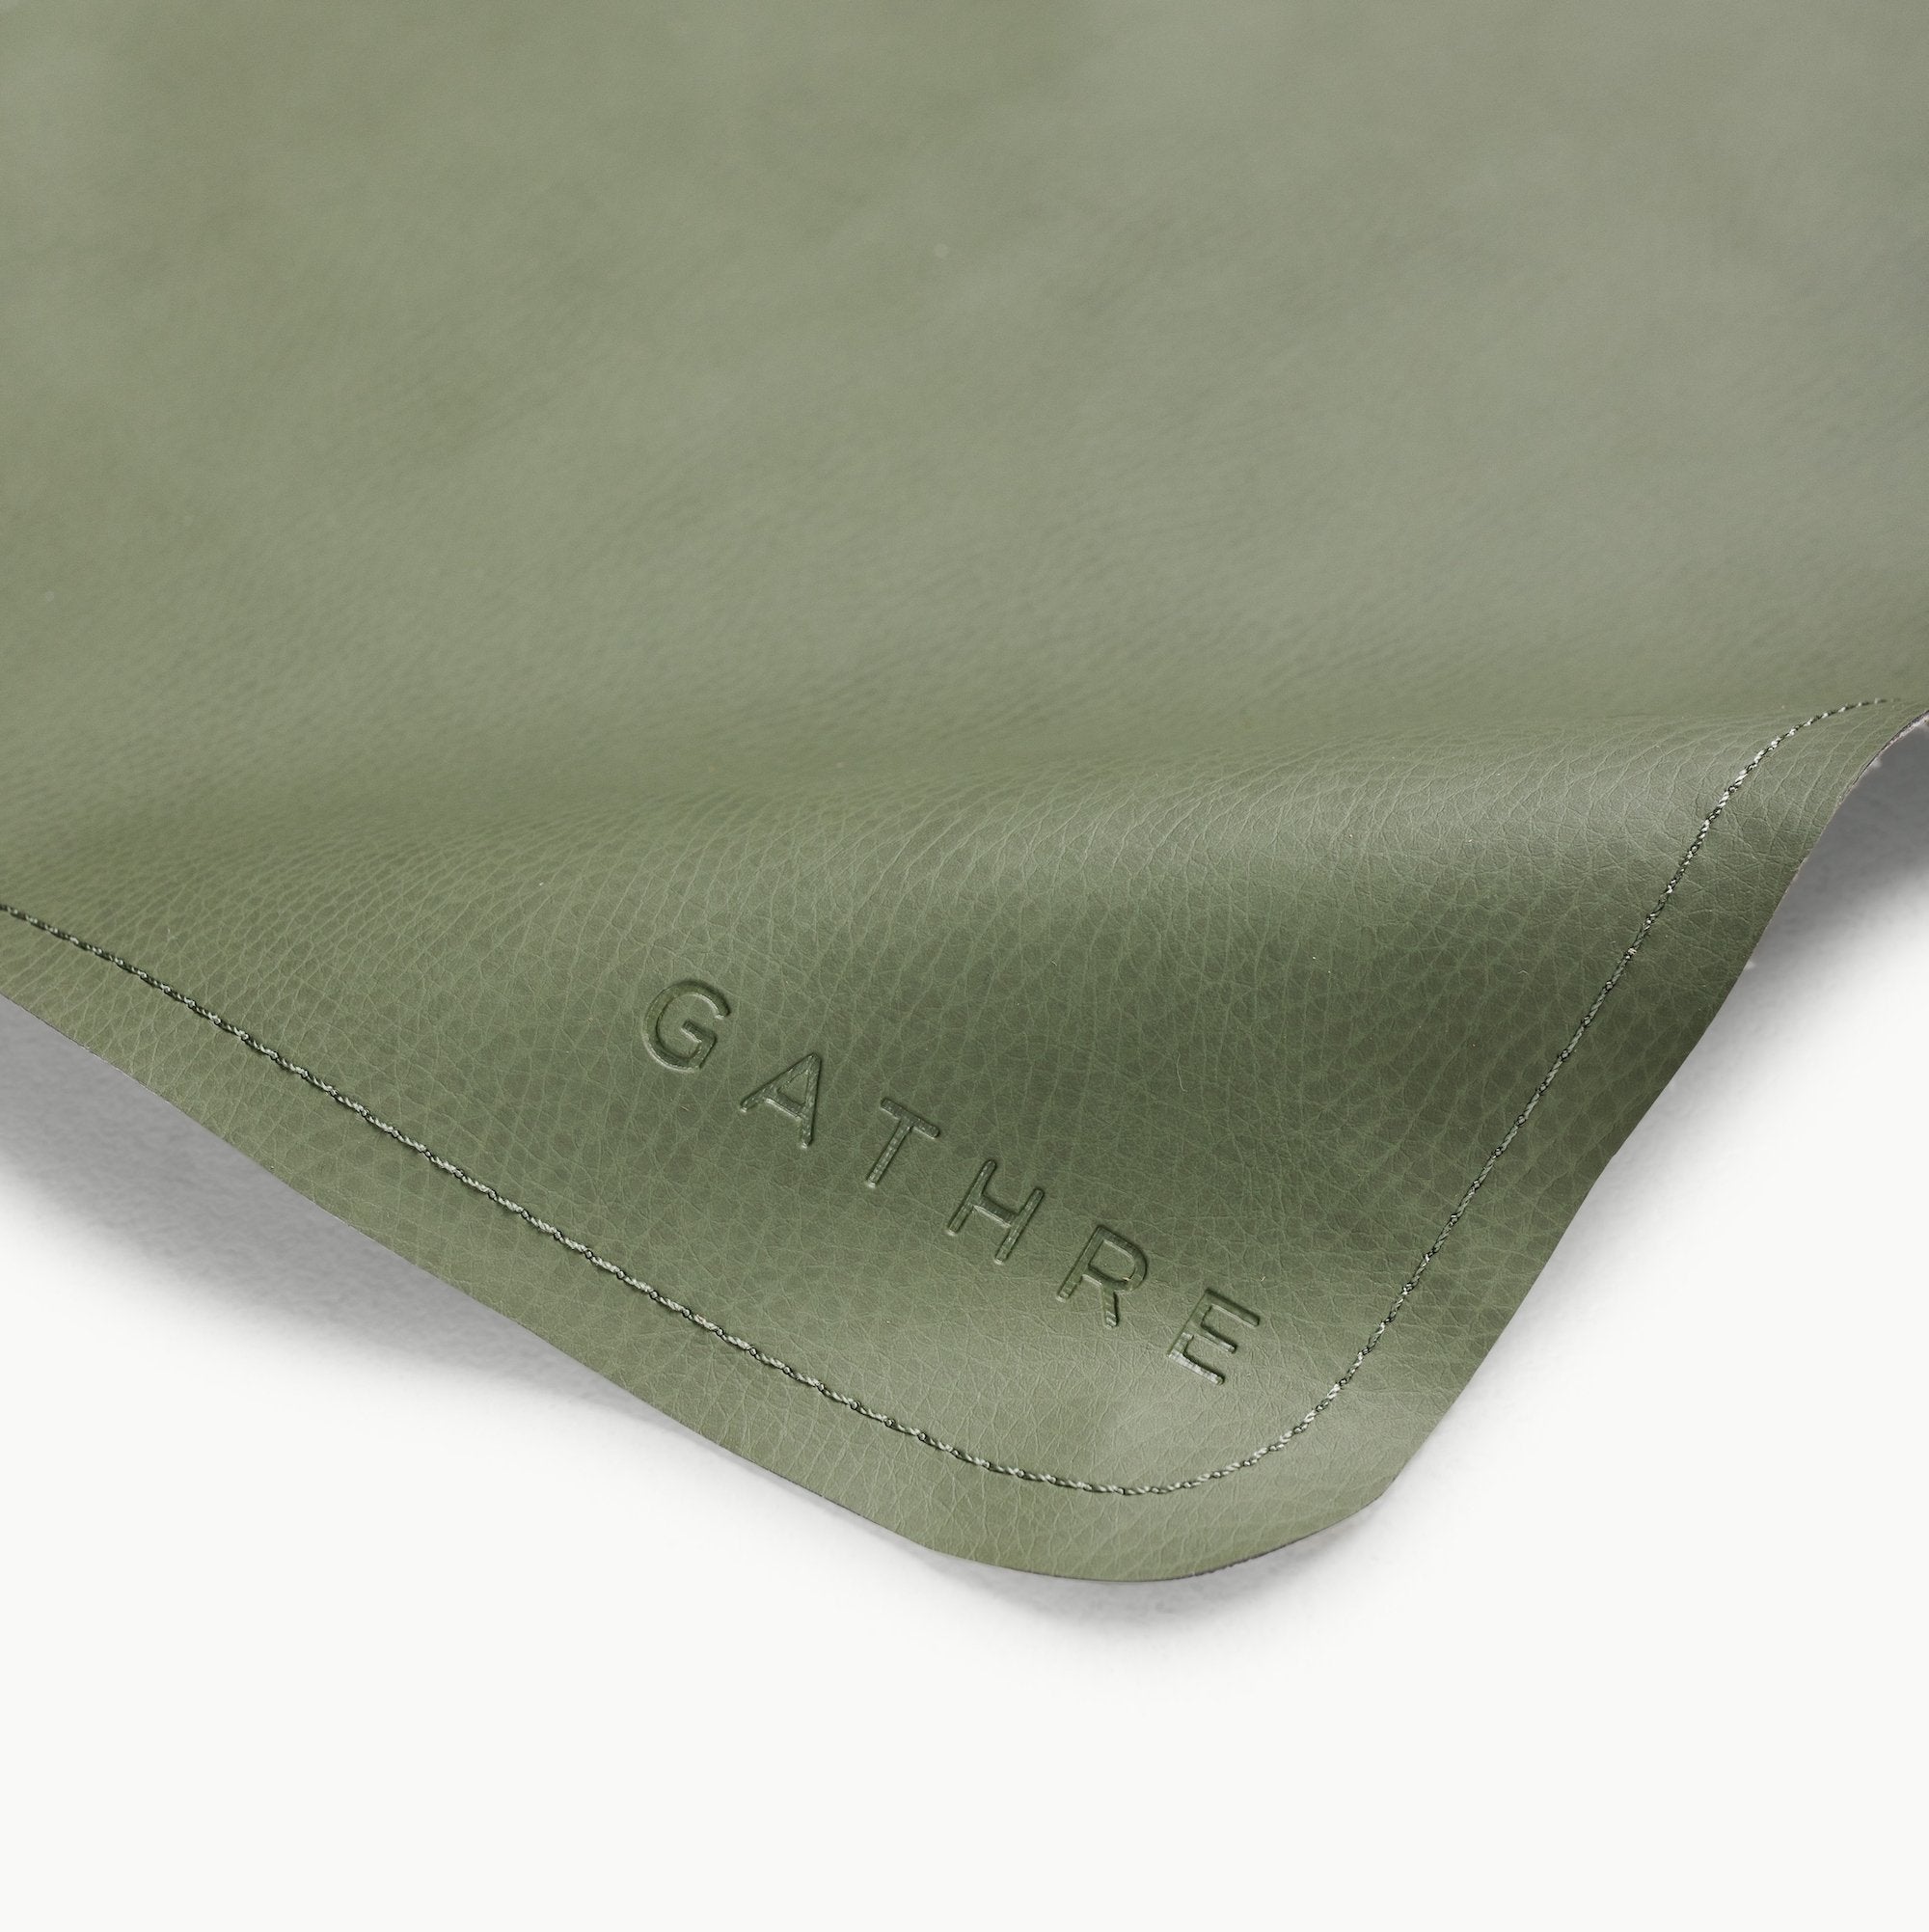 Thyme • Fog / Square@Hanging tab on the Thyme/Fog Maxi Mat